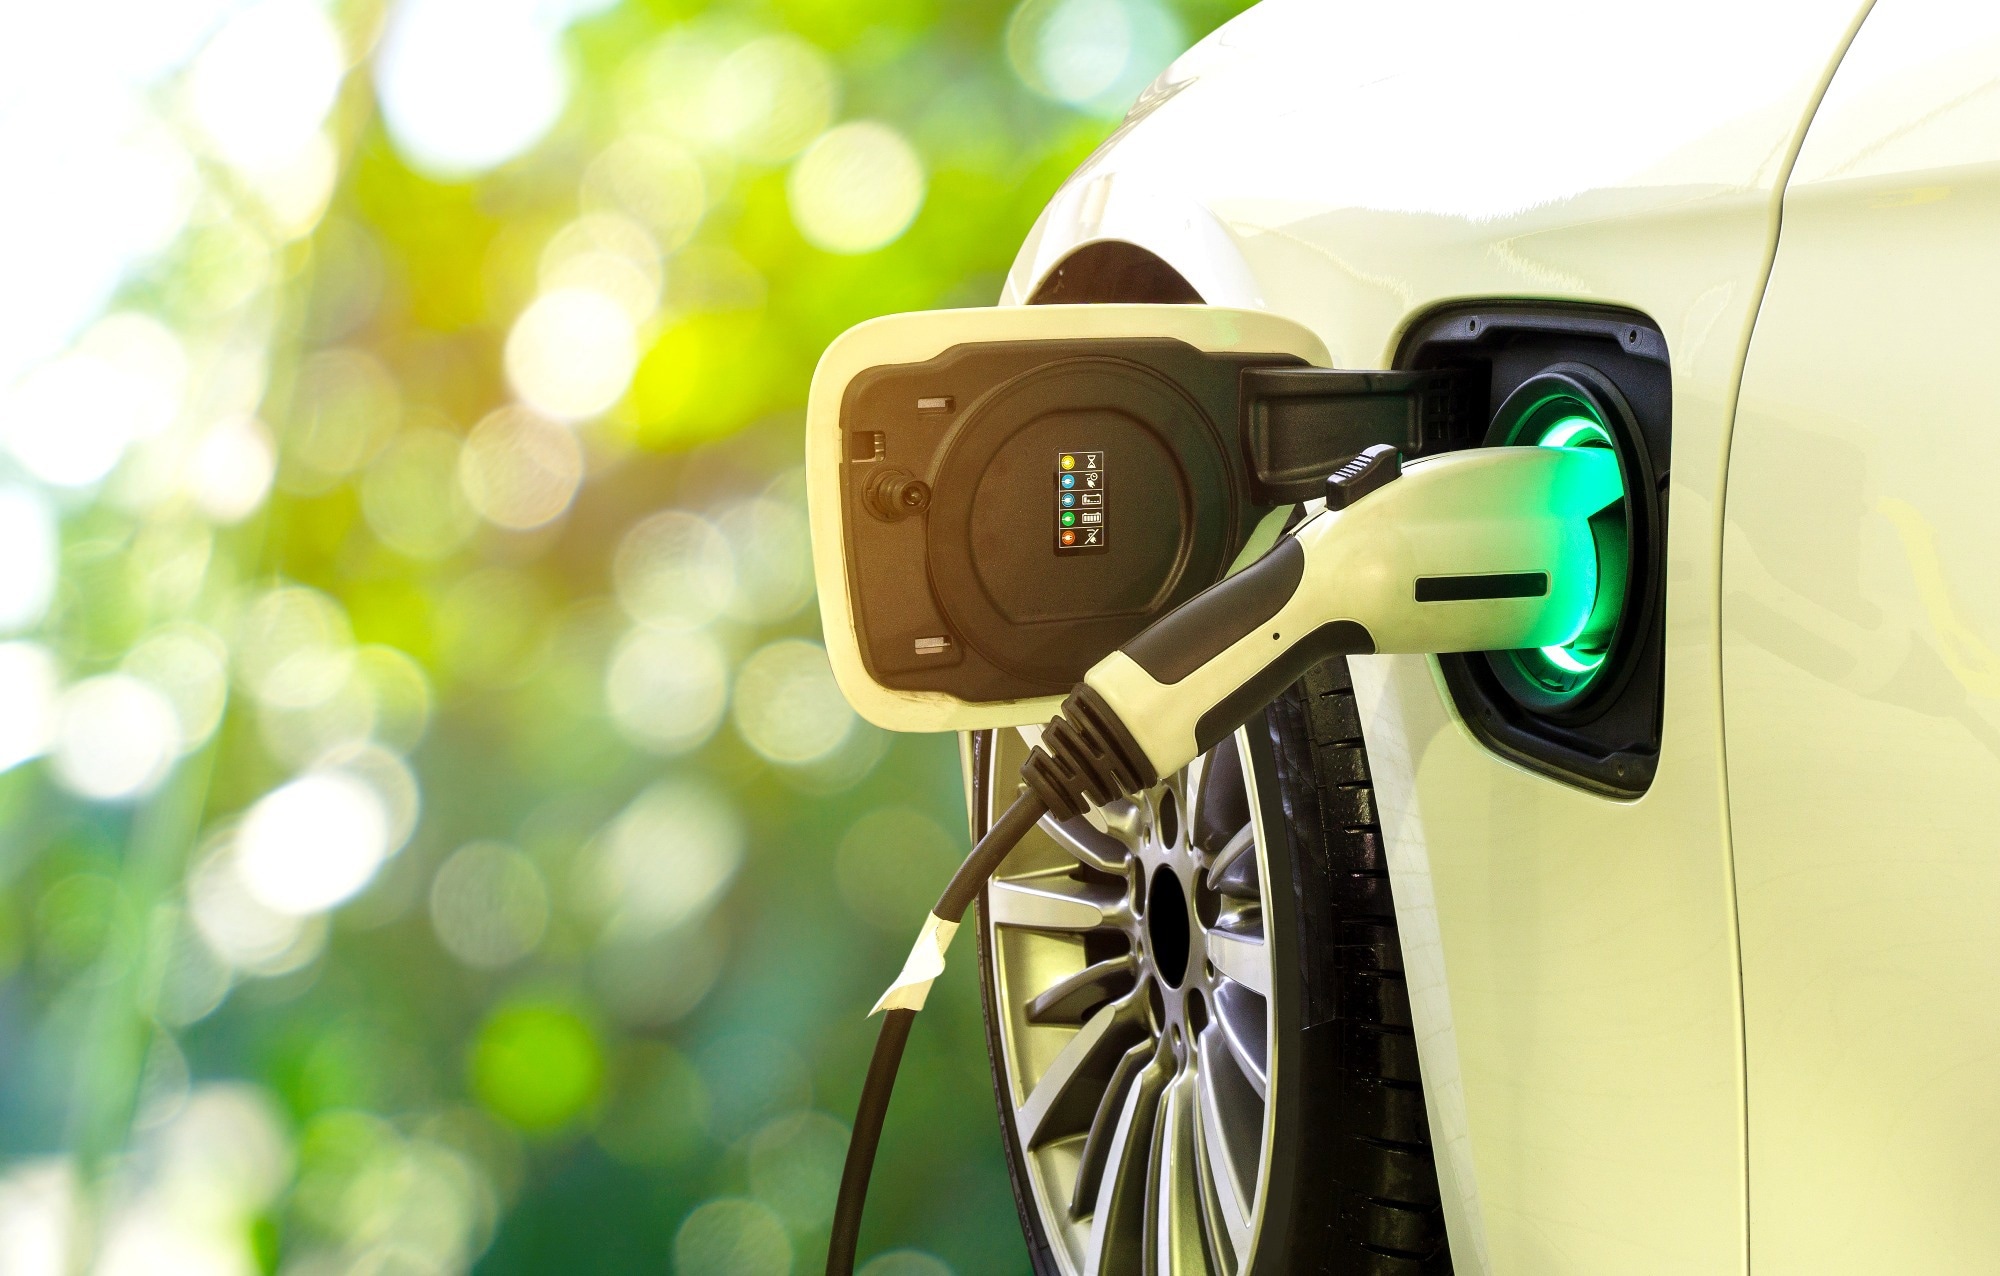 Study: High-power chargers for electric vehicles: are they safe for patients with pacemakers and defibrillators? Image Credit: SmileFight/Shutterstock.com